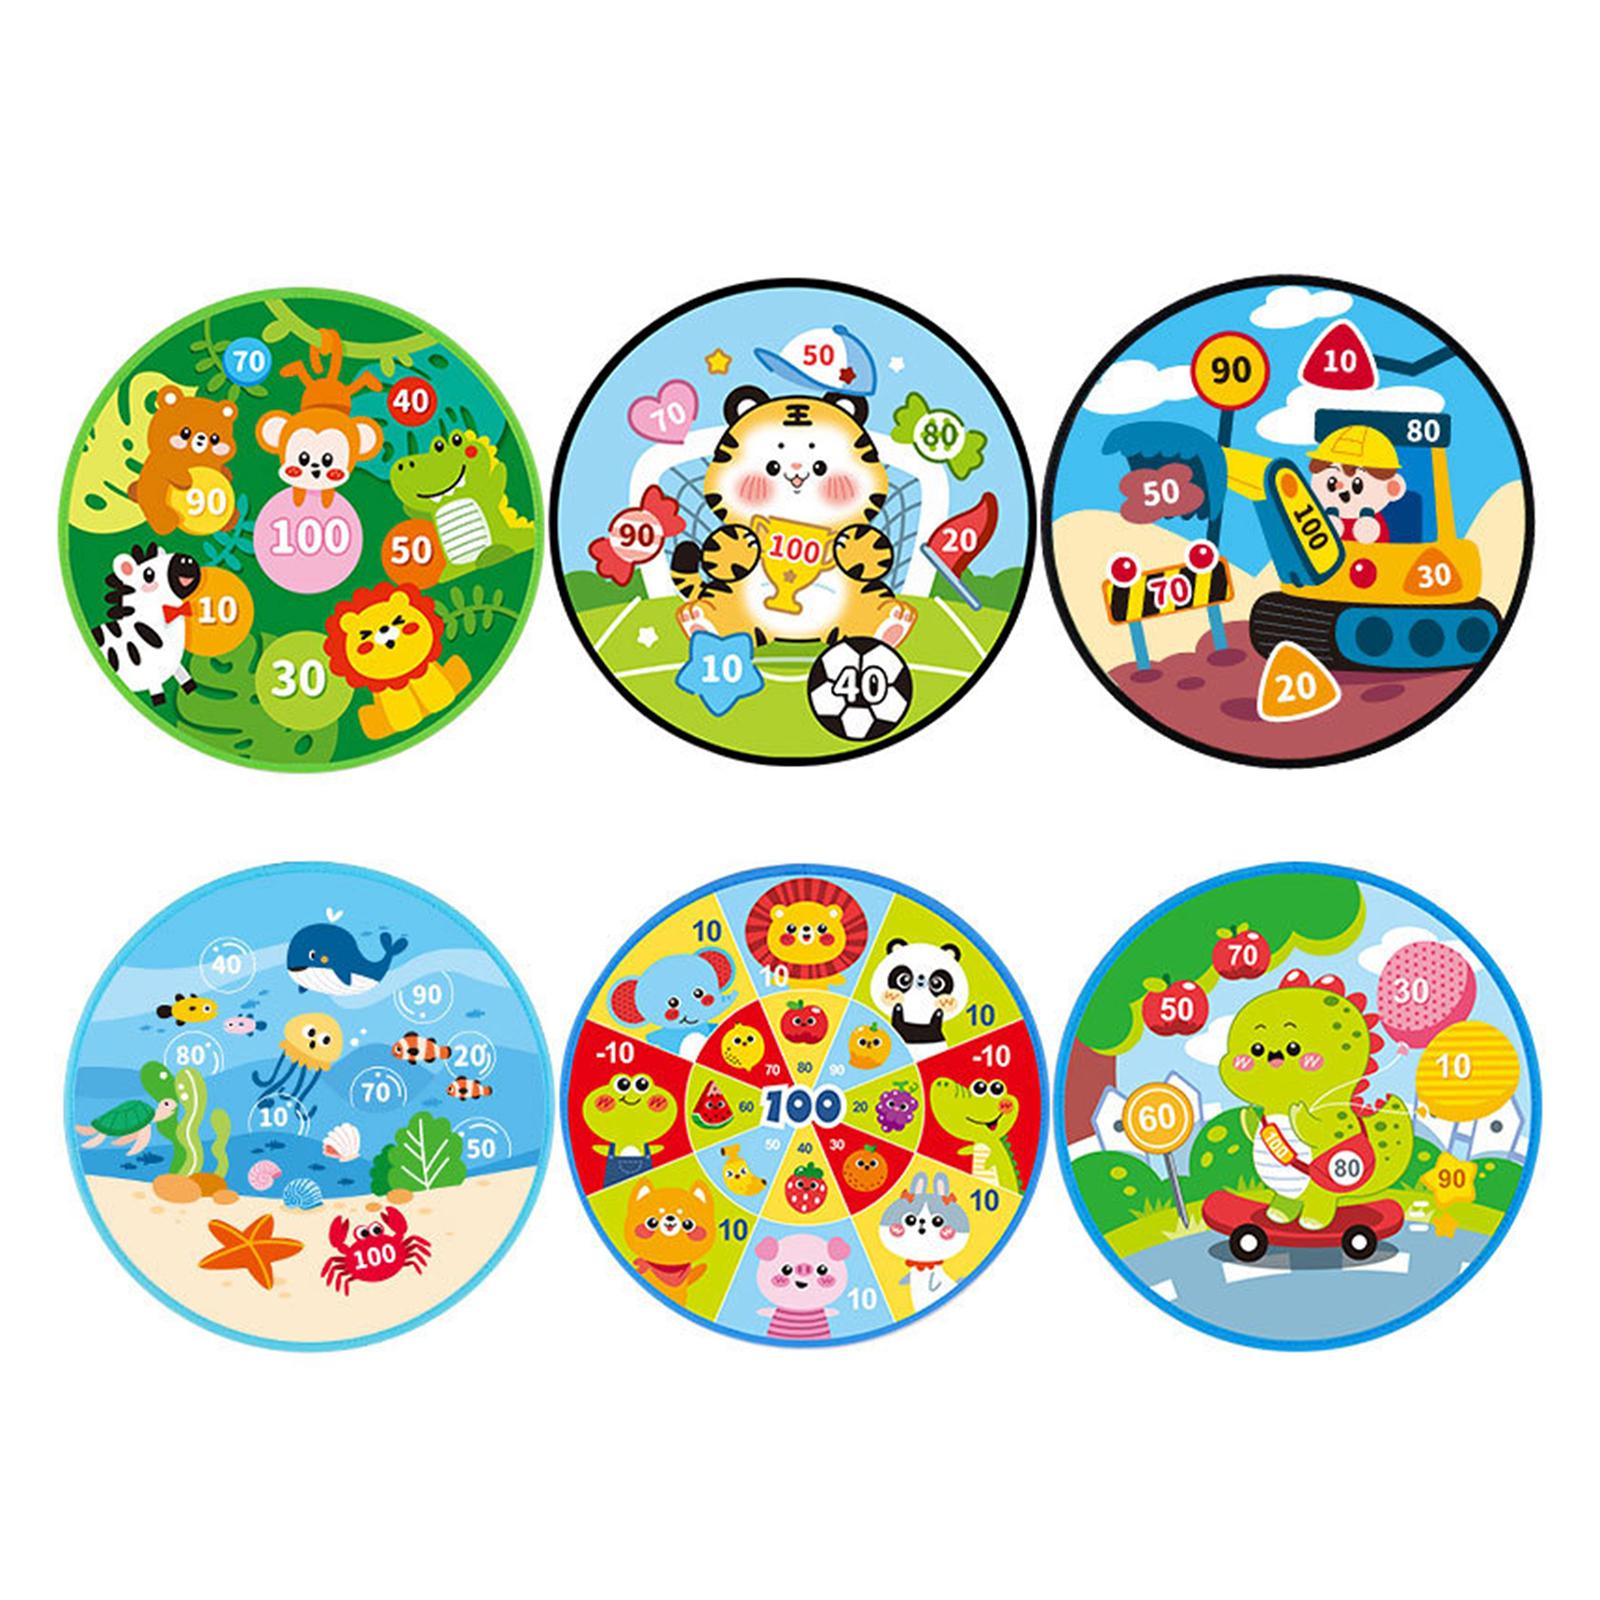 Cartoon board Toys Home Wall Mounted with 8 Sticky Balls Games animal forest